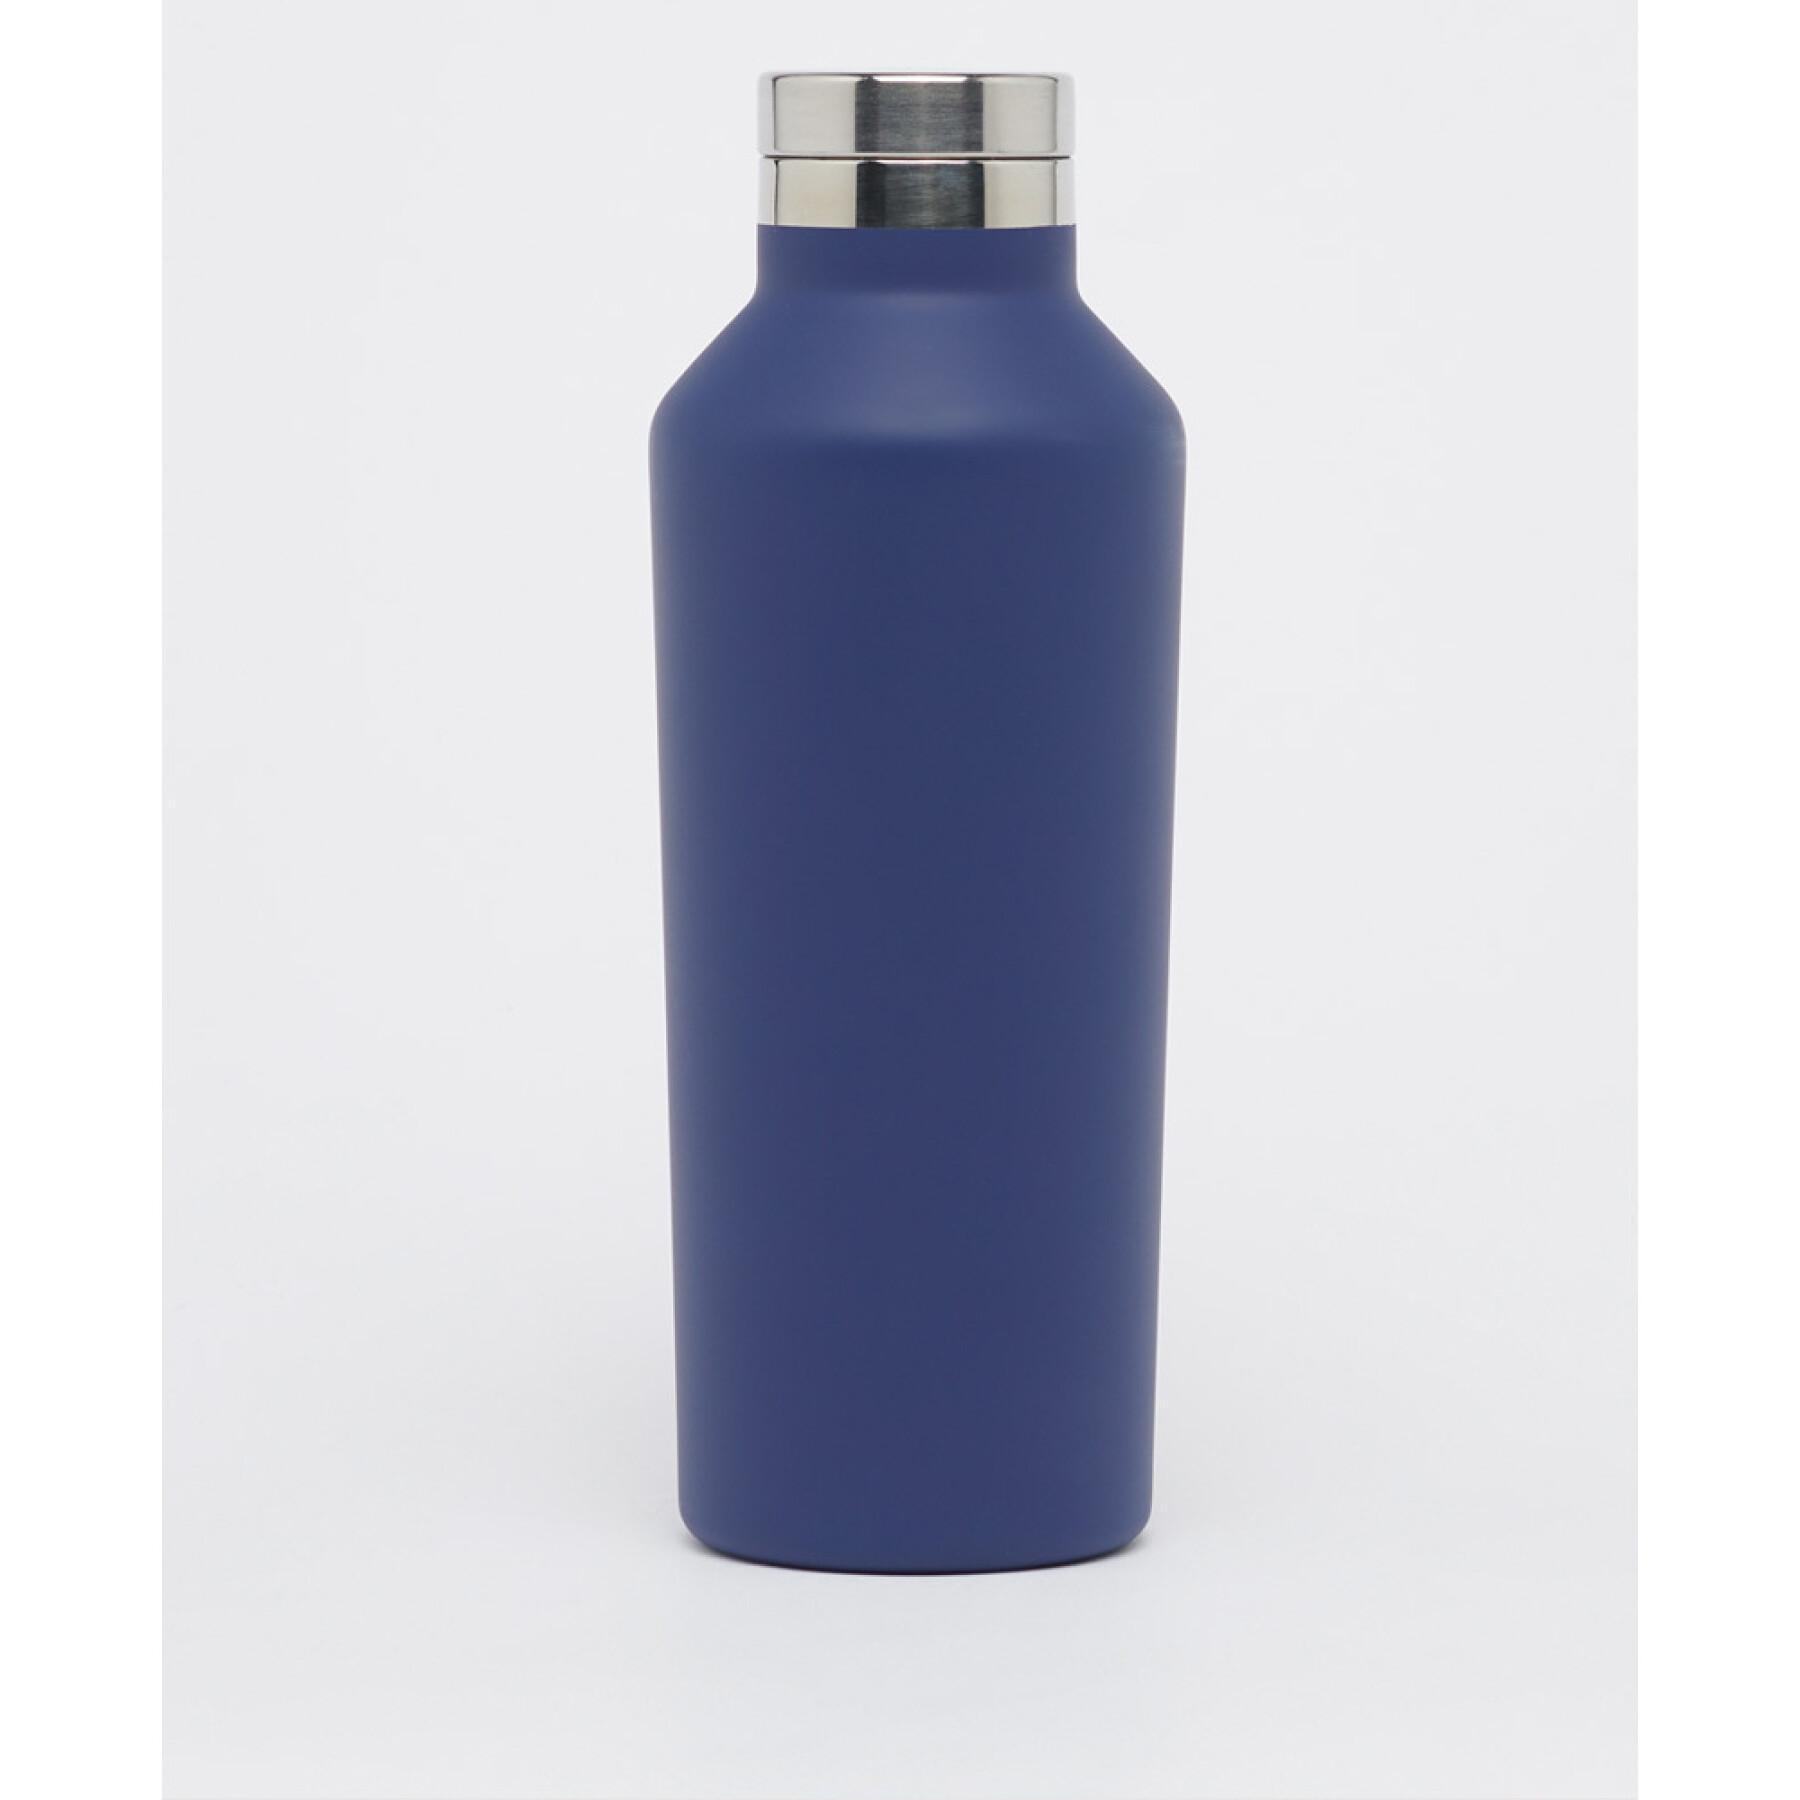 Stainless steel water bottle Superdry Training